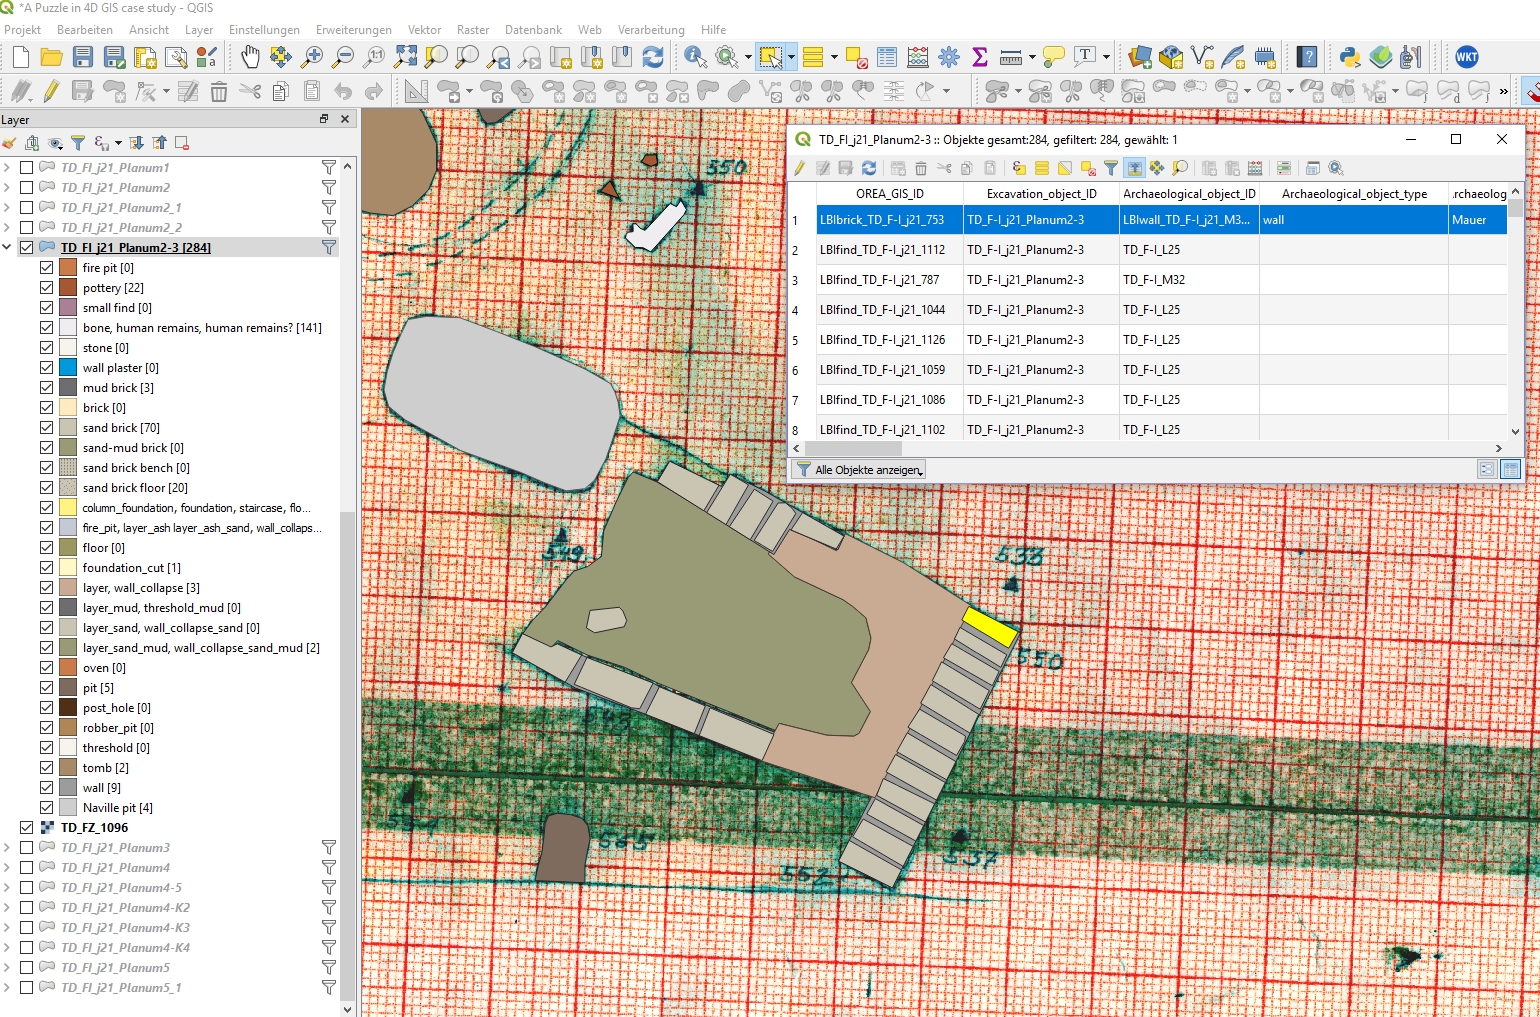 Screenshot of the GIS project in QGIS.